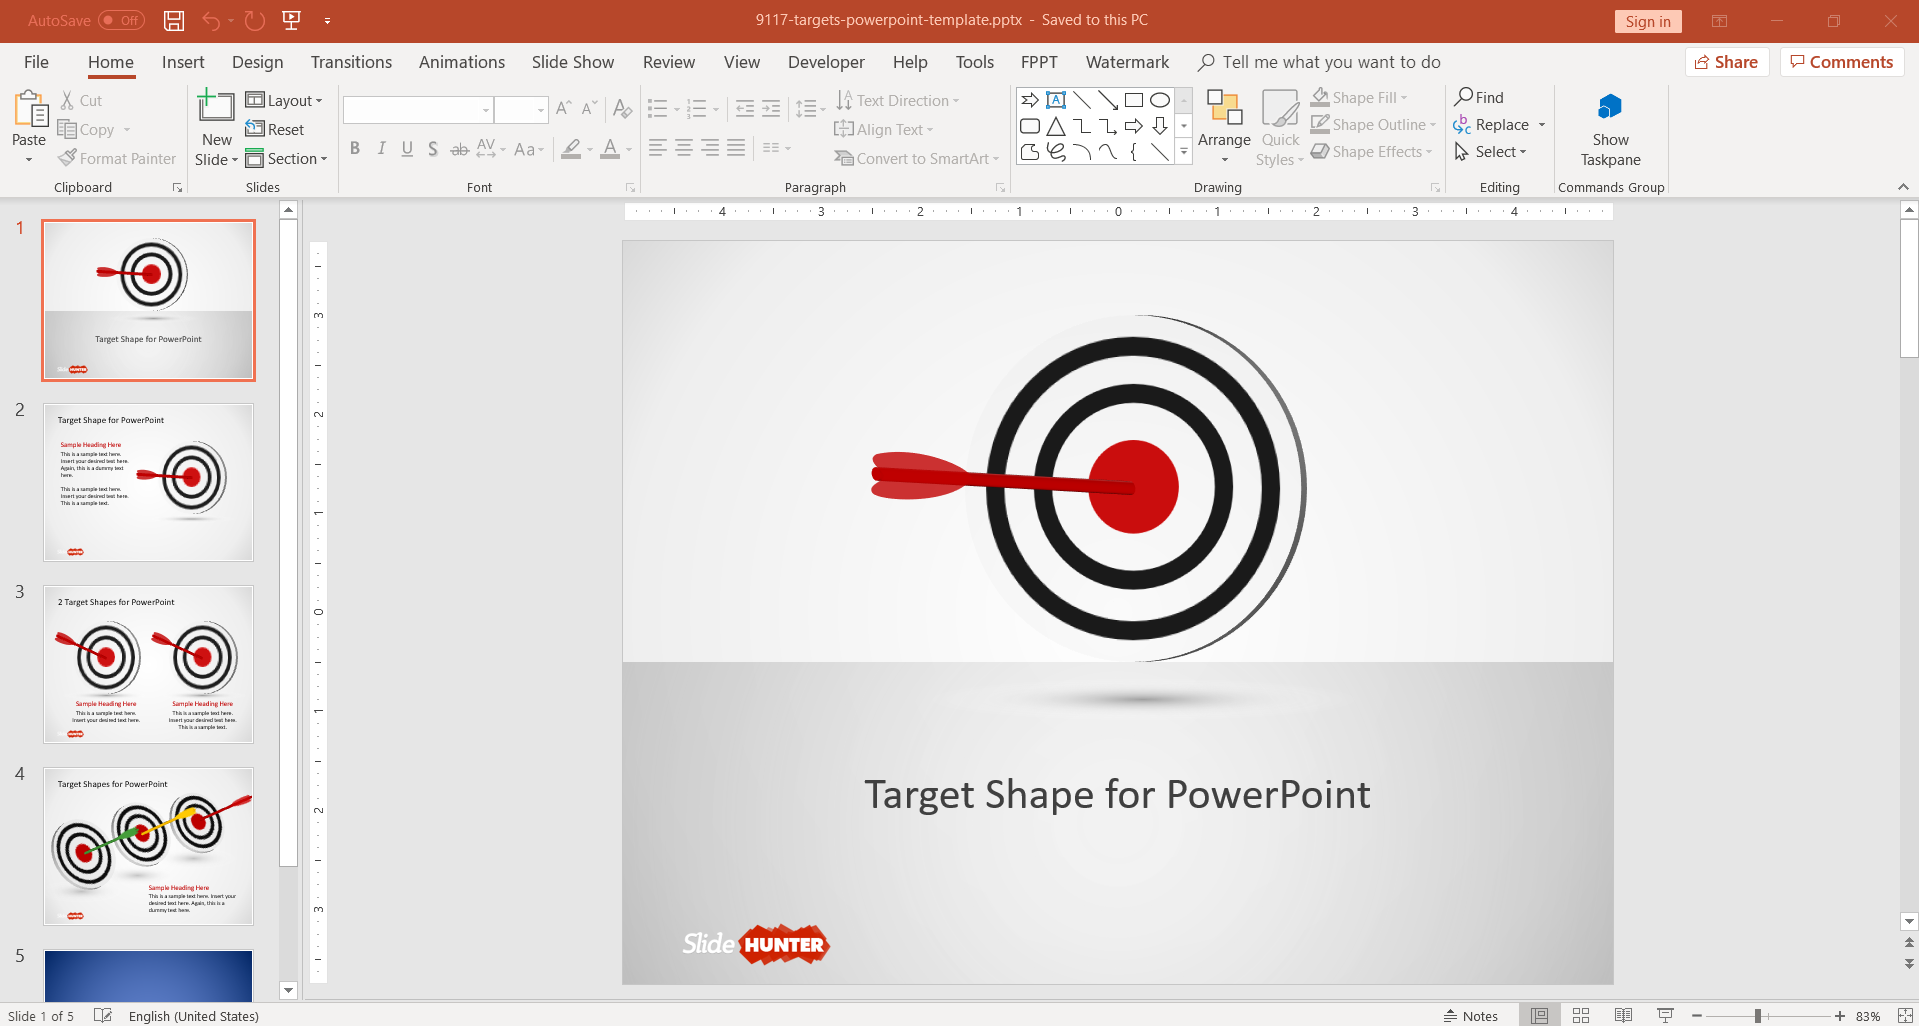 Target shape diagram for PowerPoint PPT presentations with the Goal diagram style